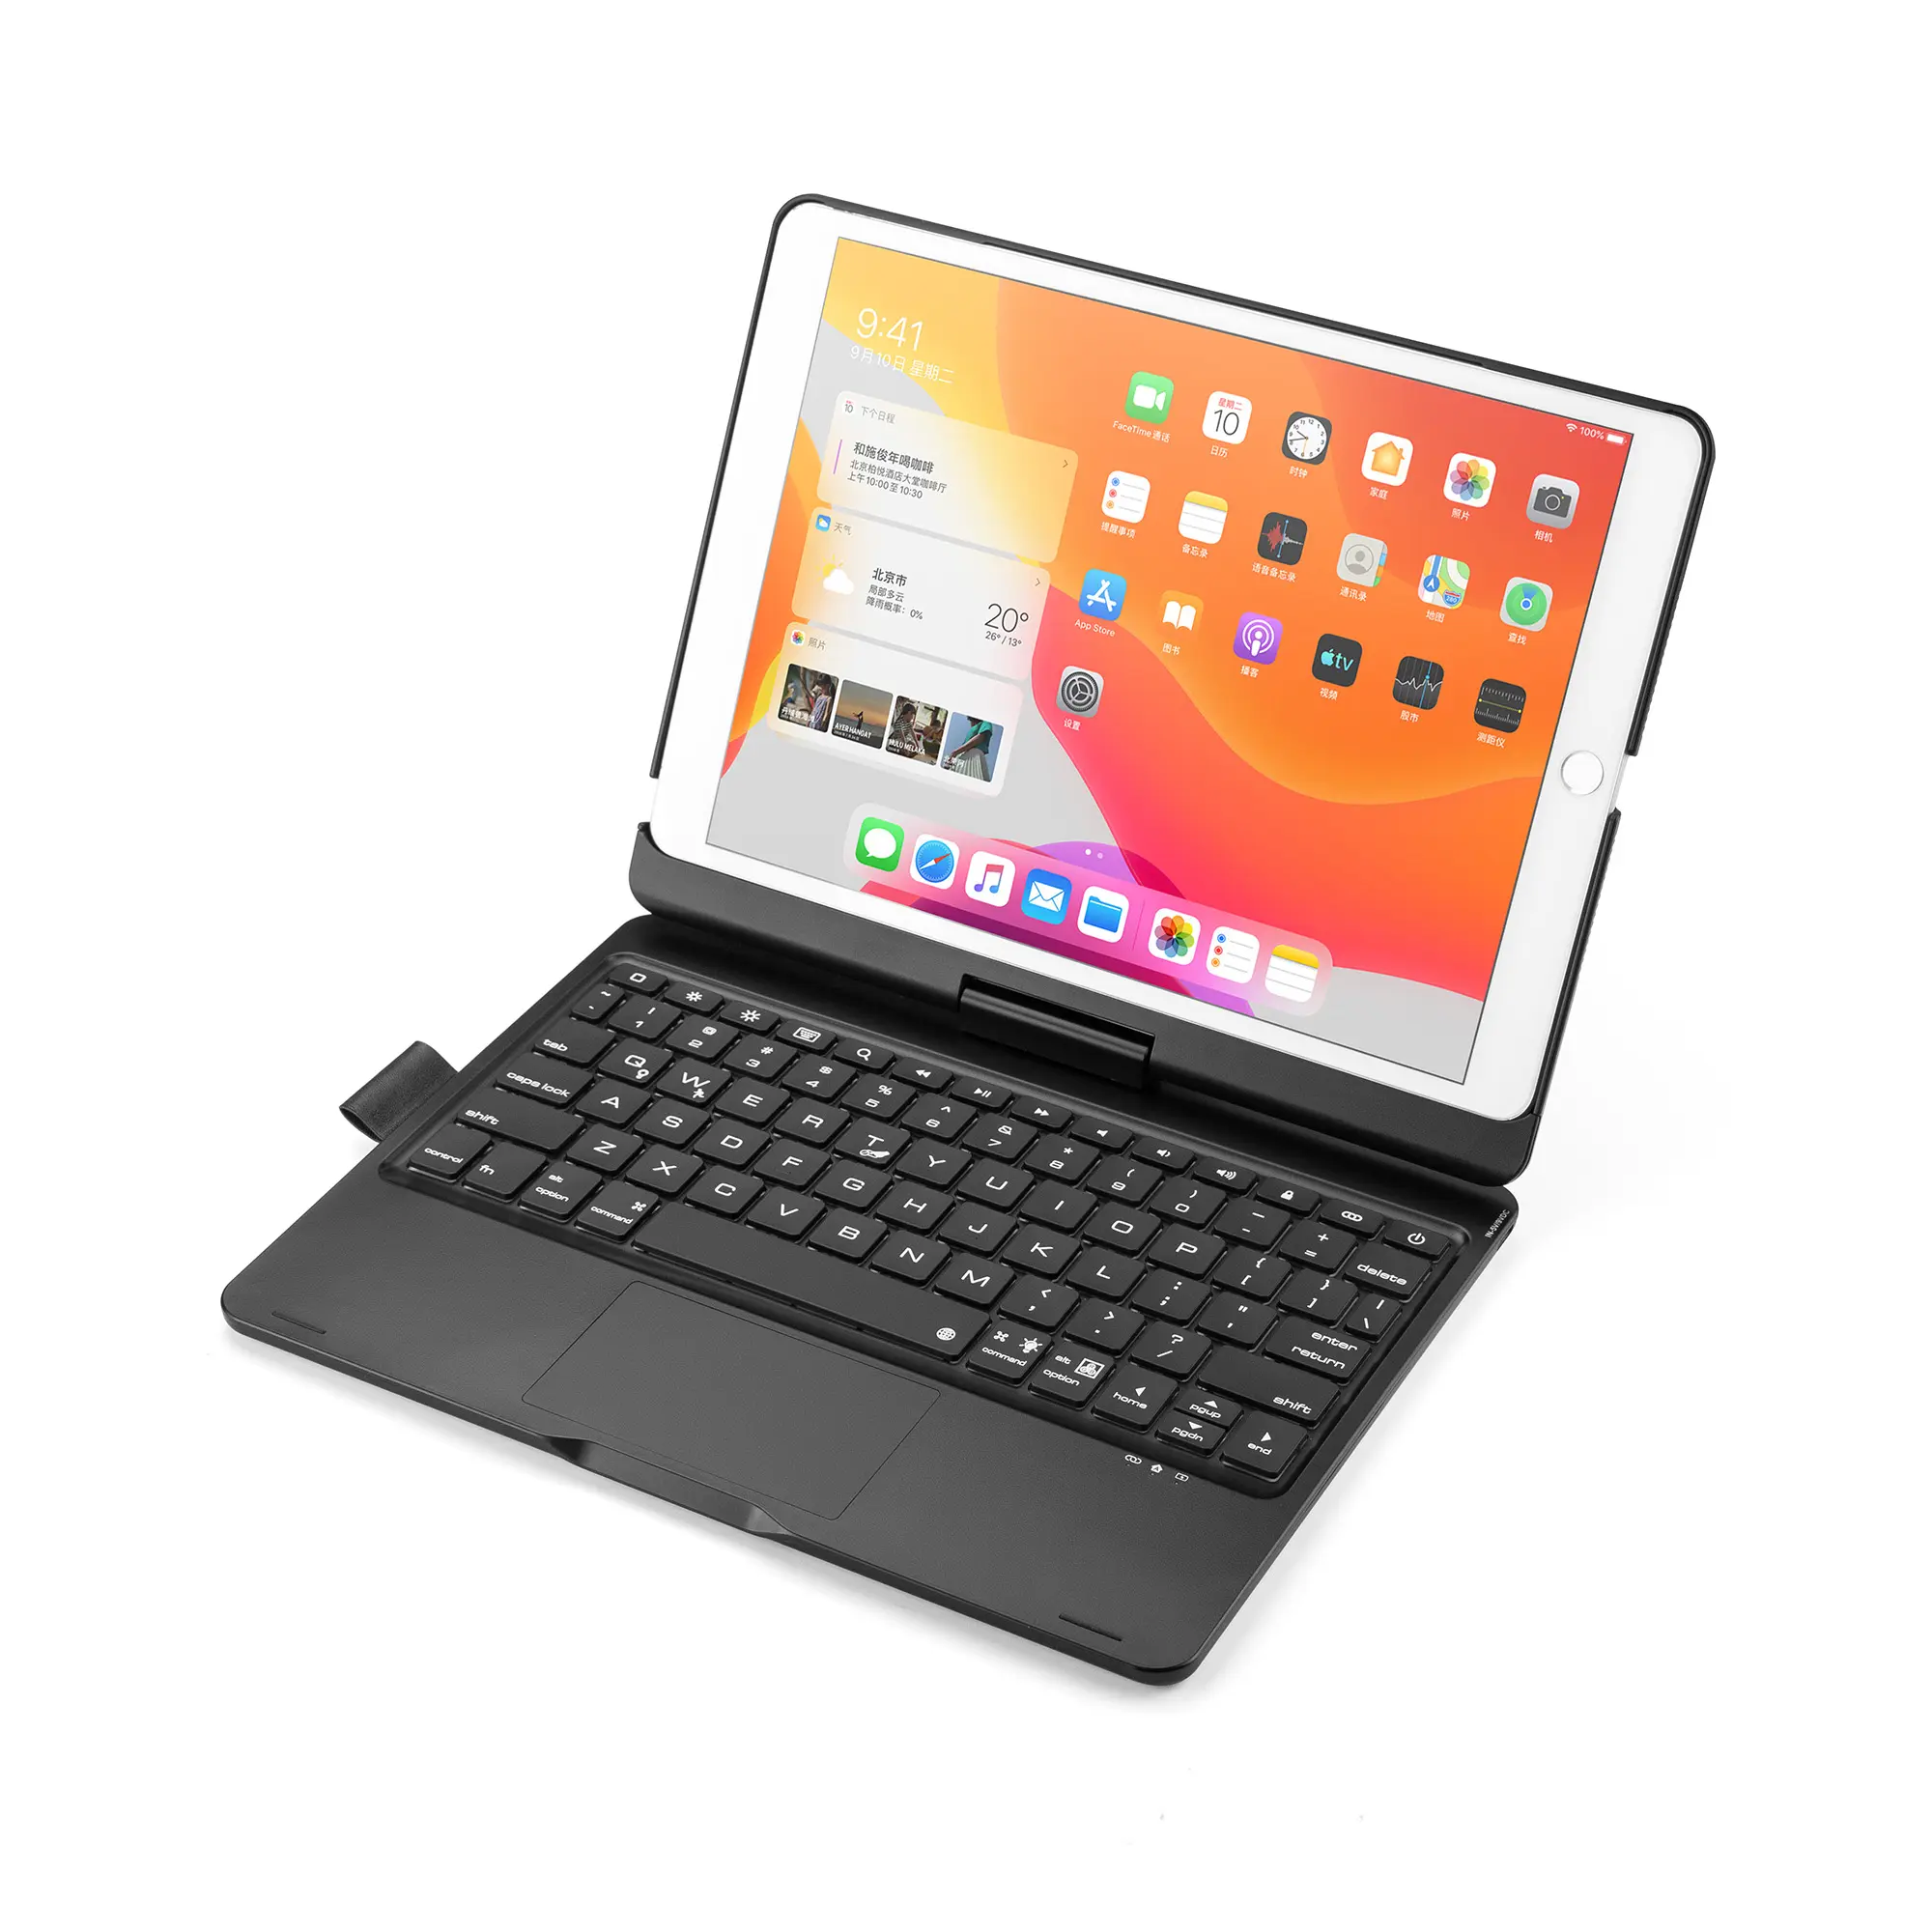 Factory new 360-degree rotating Blue tooth keyboard for iPad 10.2/10.5 inch with touchpad backlight